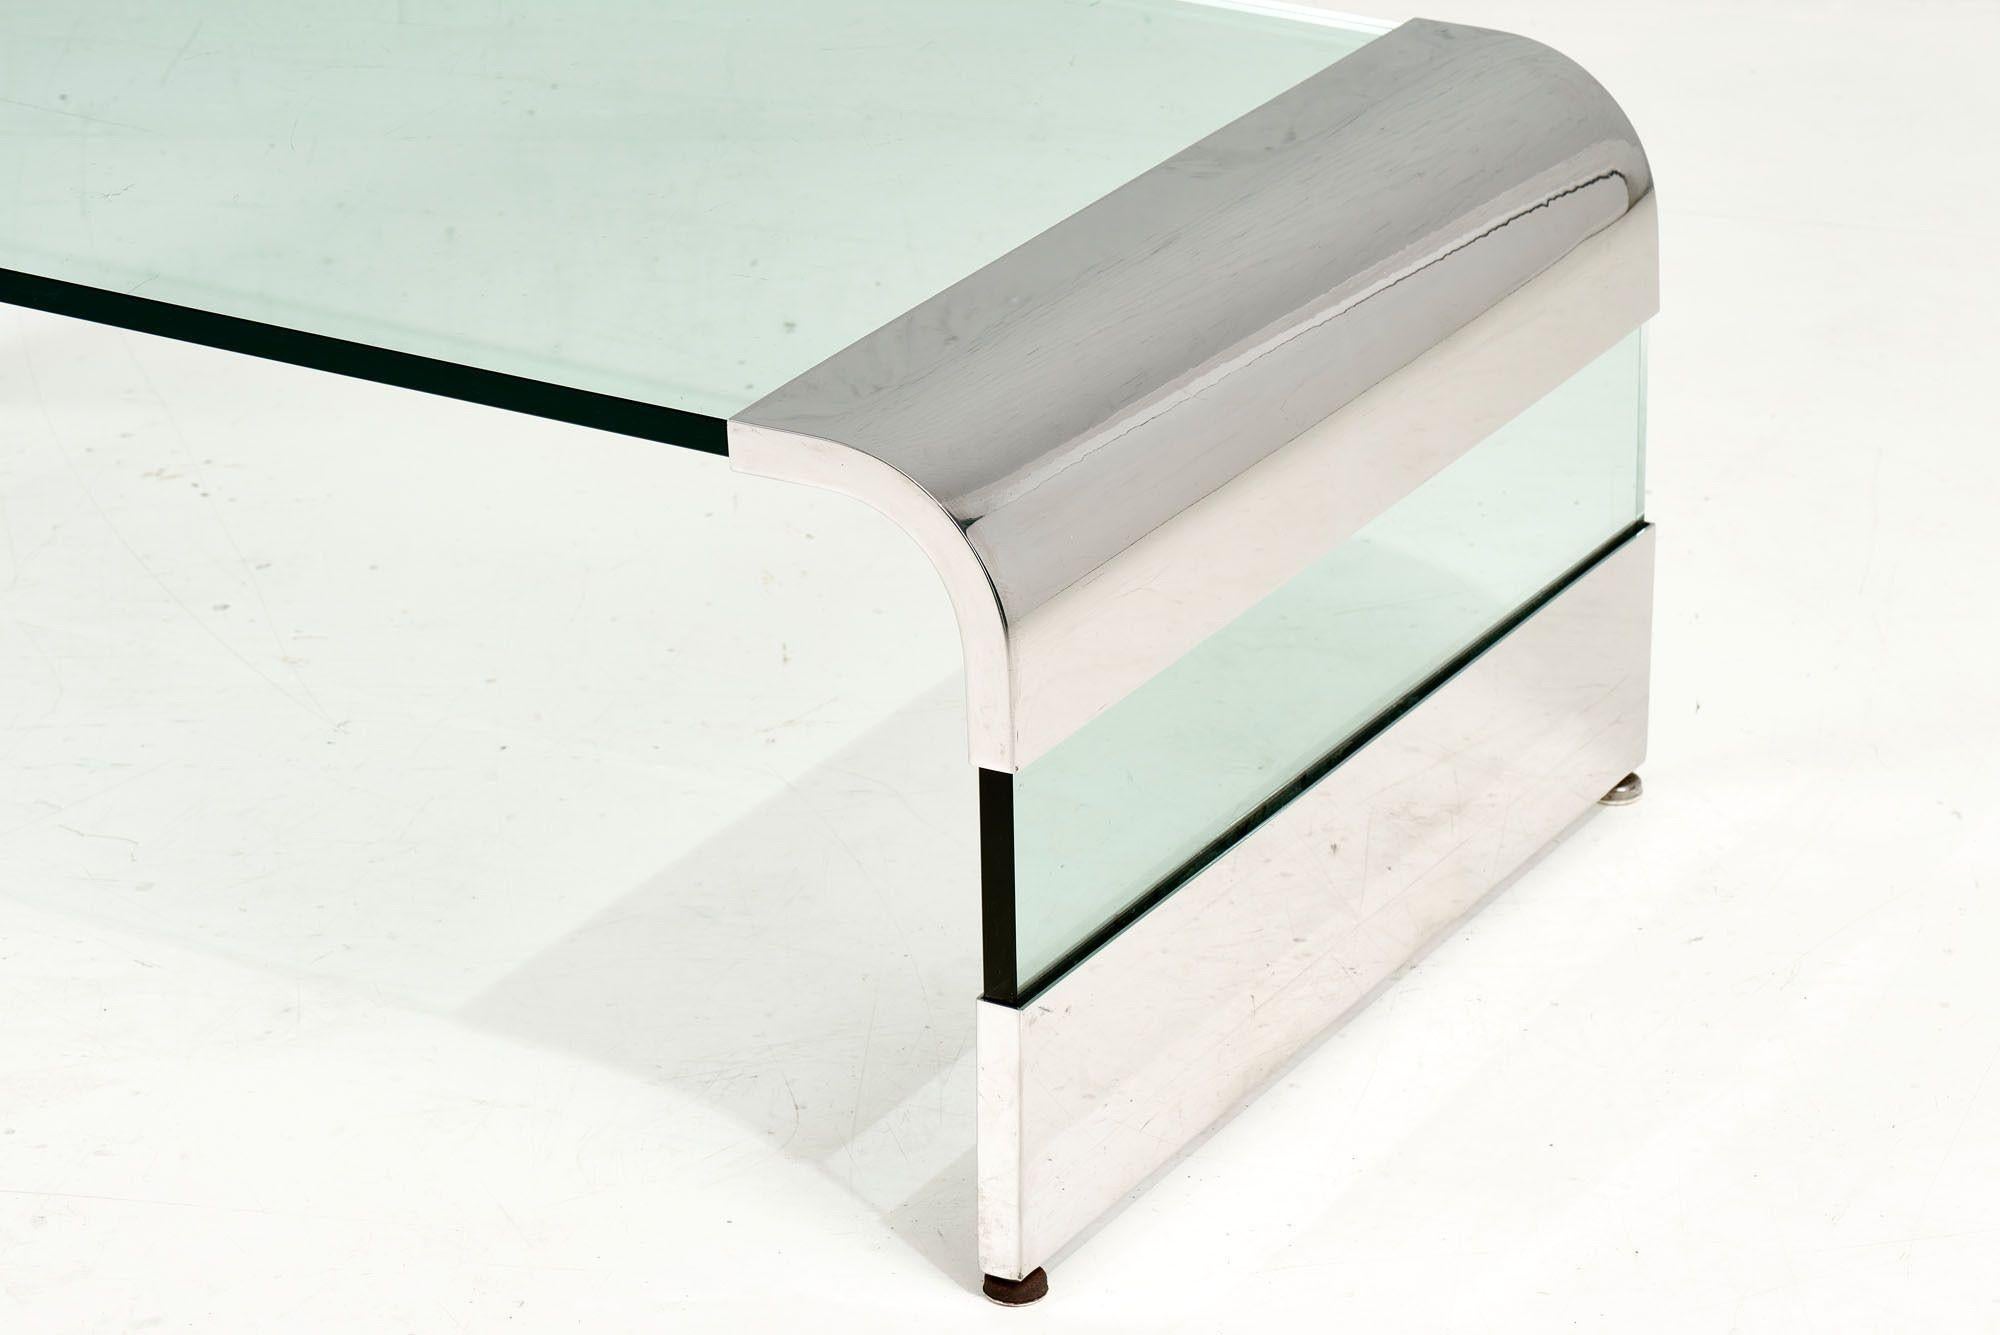 American Stainless Steel and Glass Waterfall Coffee Table by Brueton, 1970 For Sale